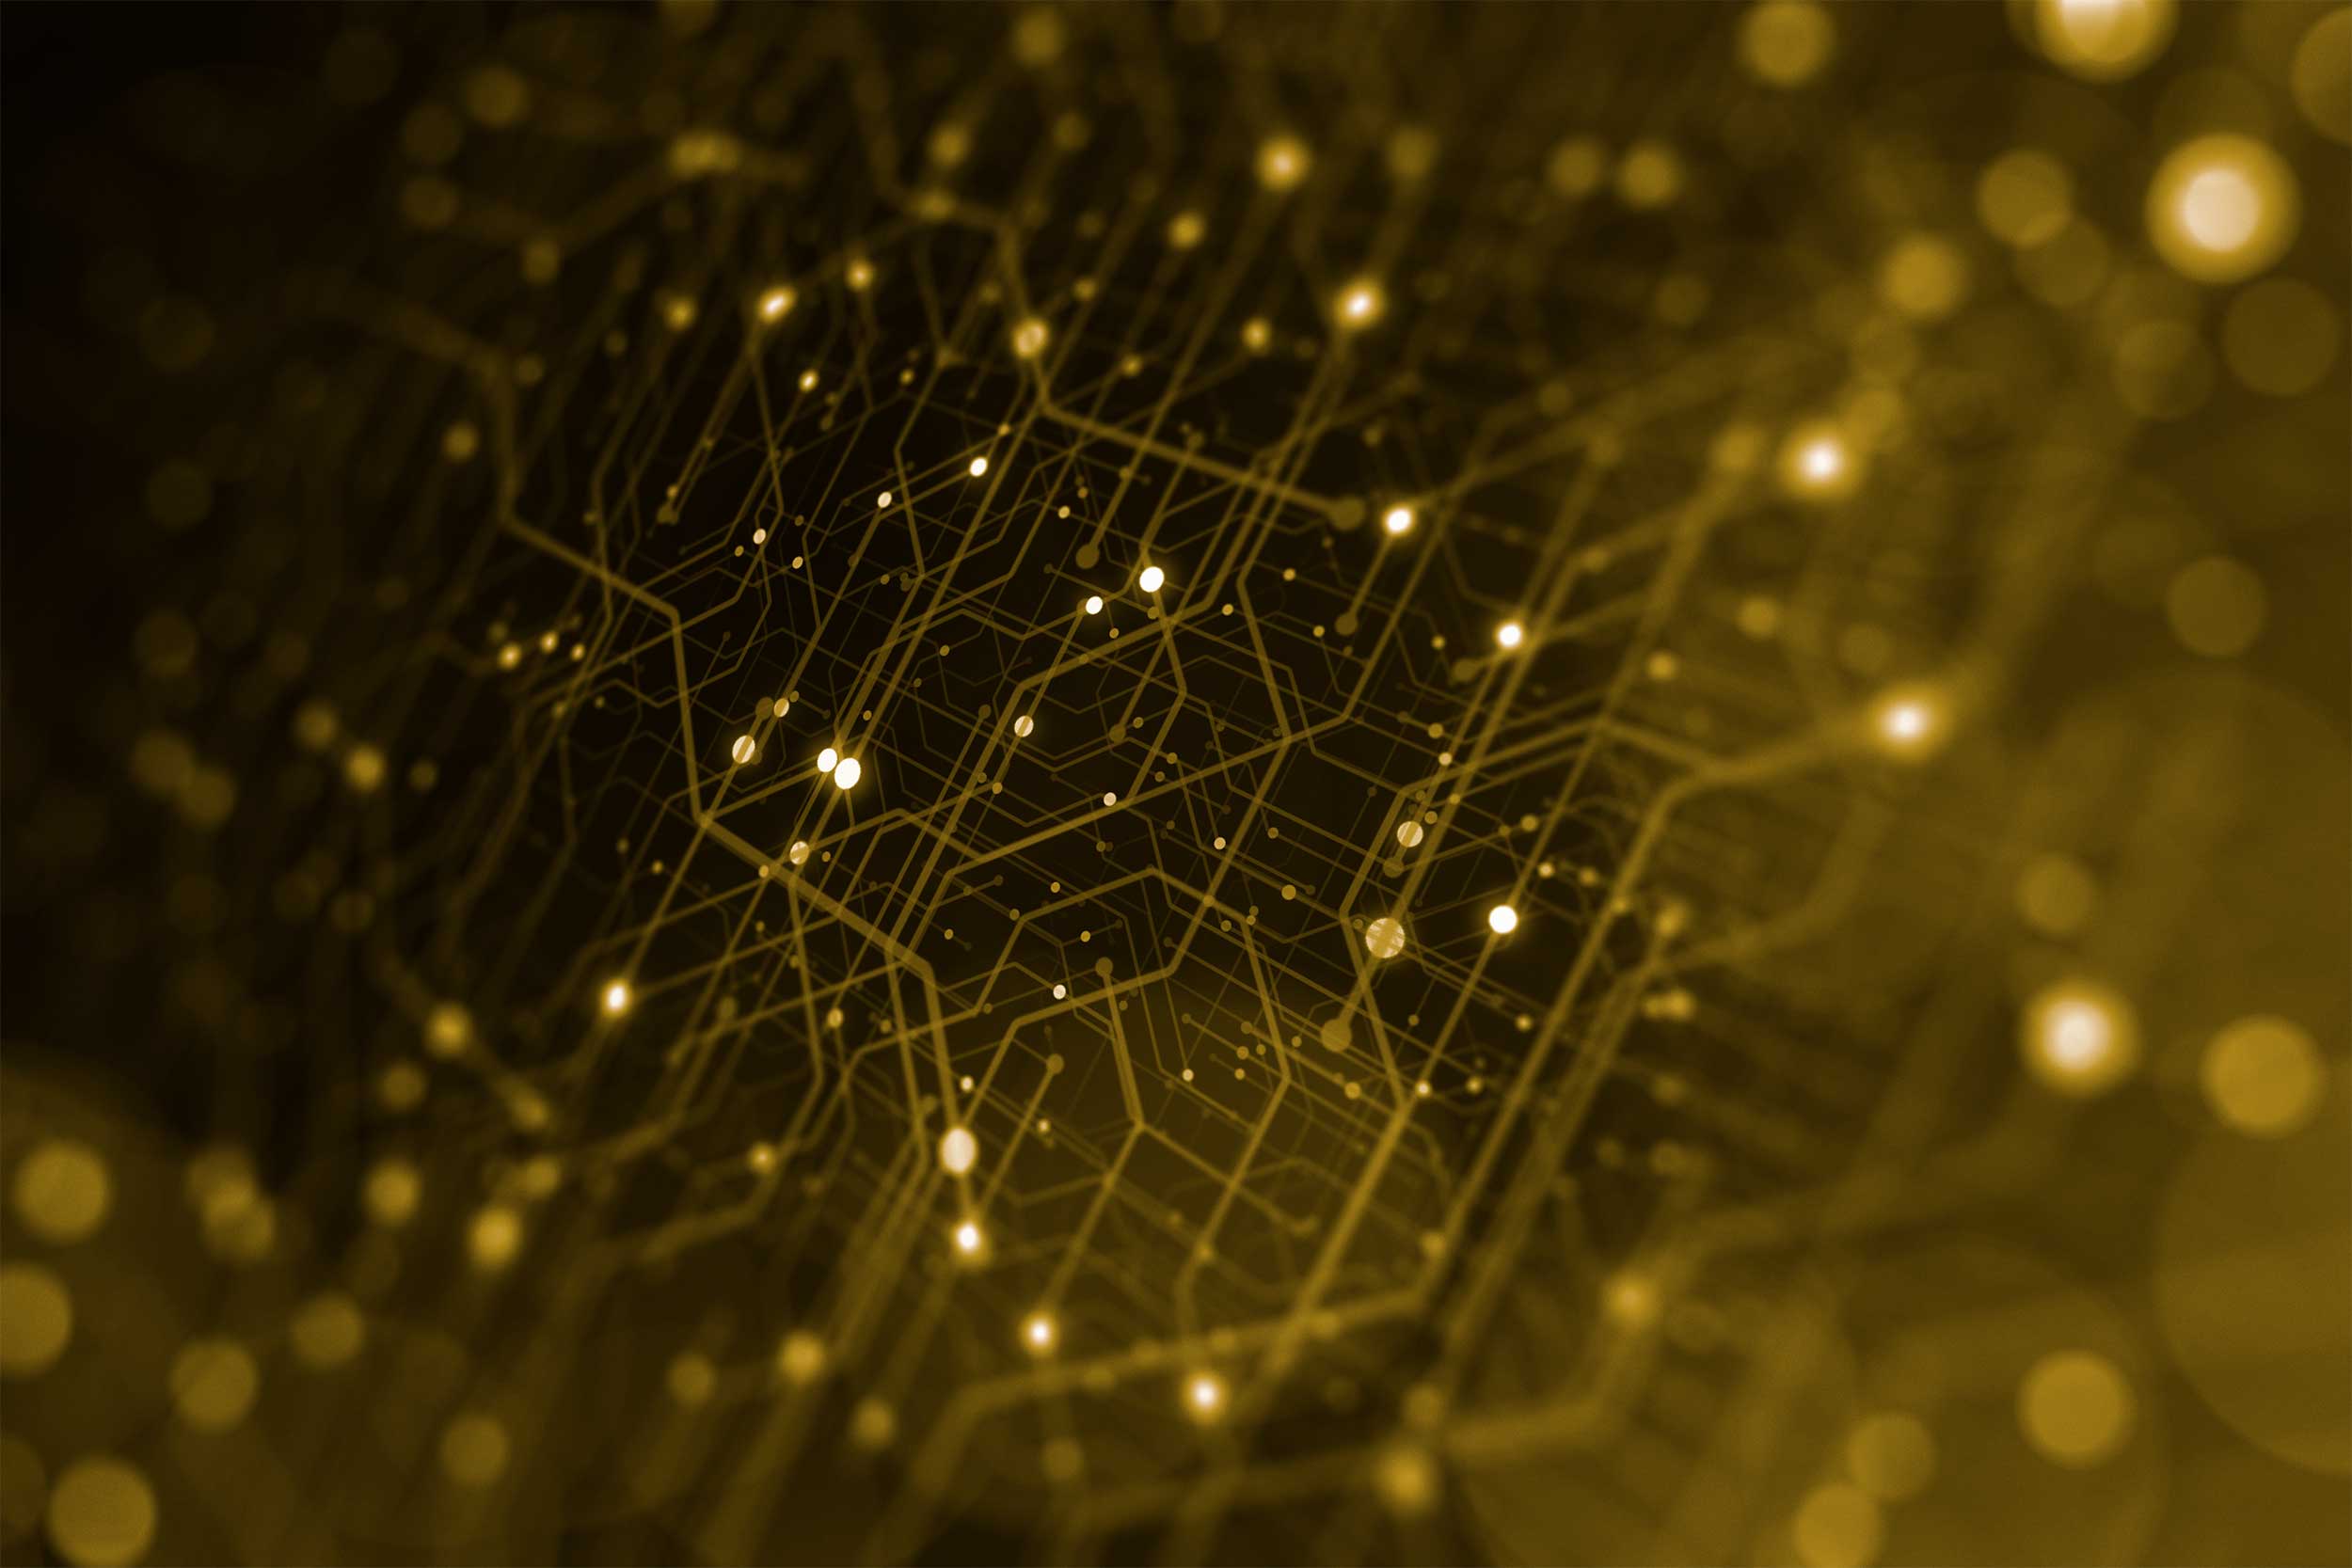 A stylized background image of electronic circuitry and sparkles